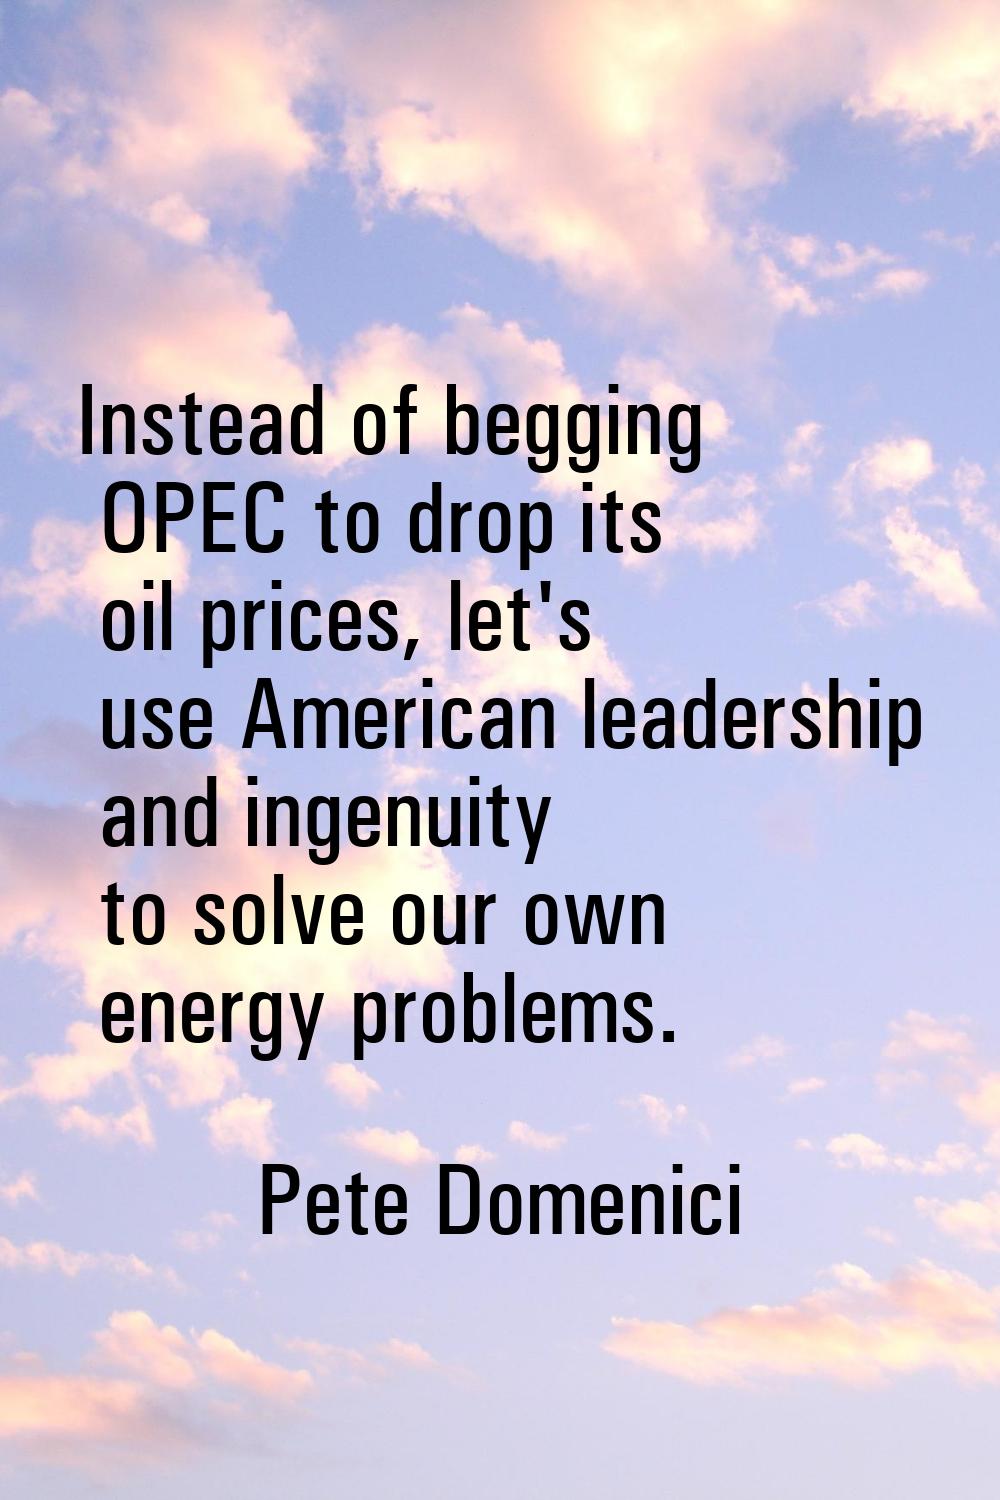 Instead of begging OPEC to drop its oil prices, let's use American leadership and ingenuity to solv